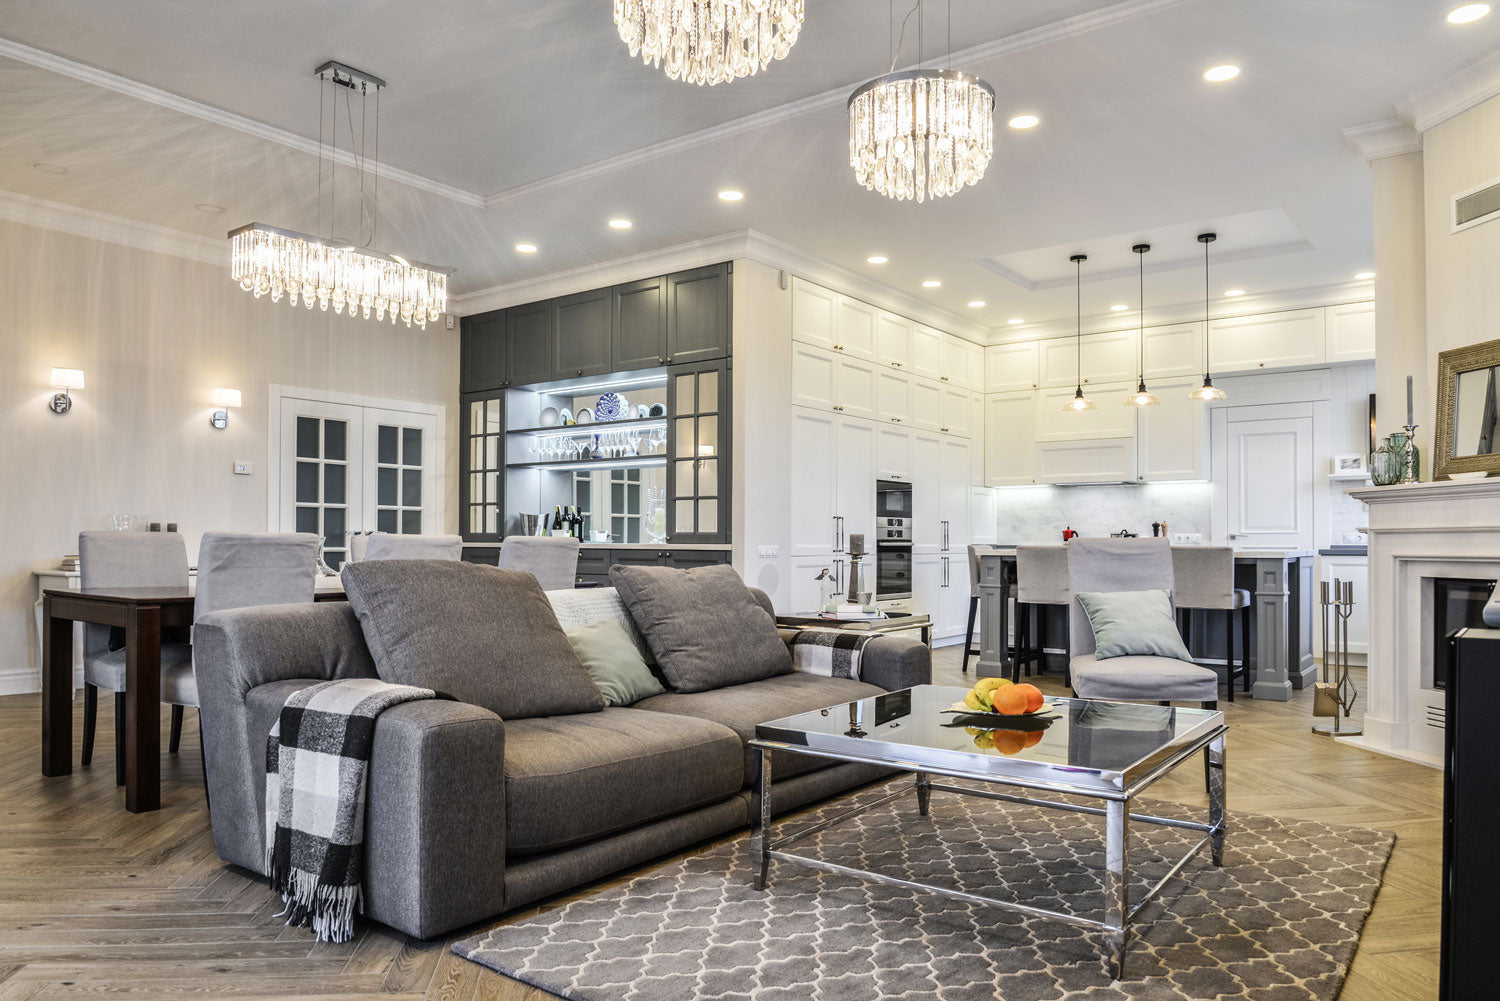 How New Homeowners Should Approach Interior Design Focused On Lighting